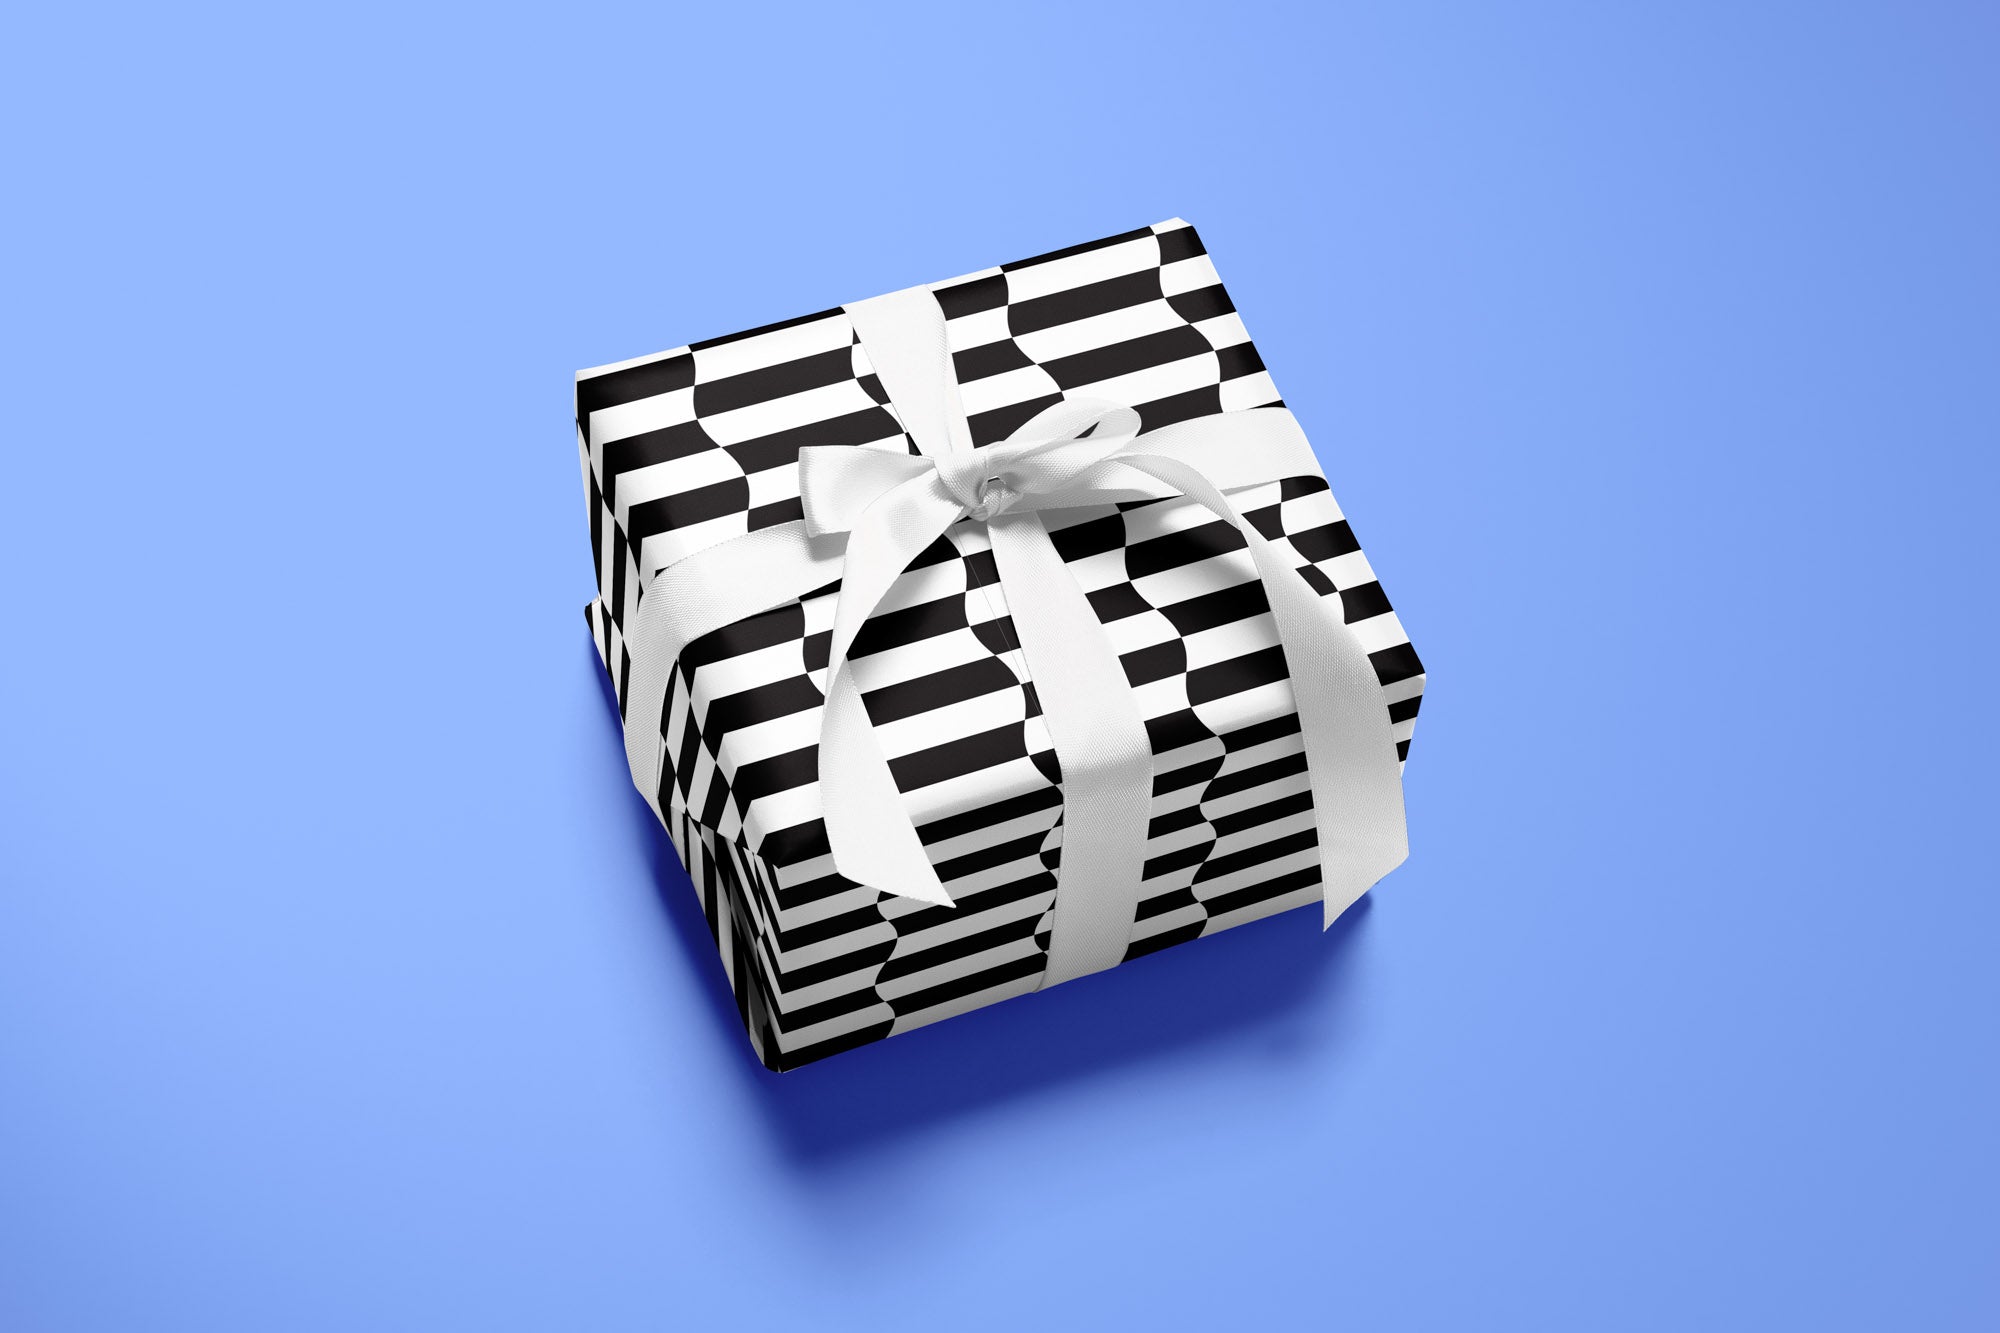 Striple Double black and white wavy checkerboard pattern wrapping paper. Colorful, modern, gift wrapping sheets with fun prints and patterns by @mydarlin_bk. Made in USA.